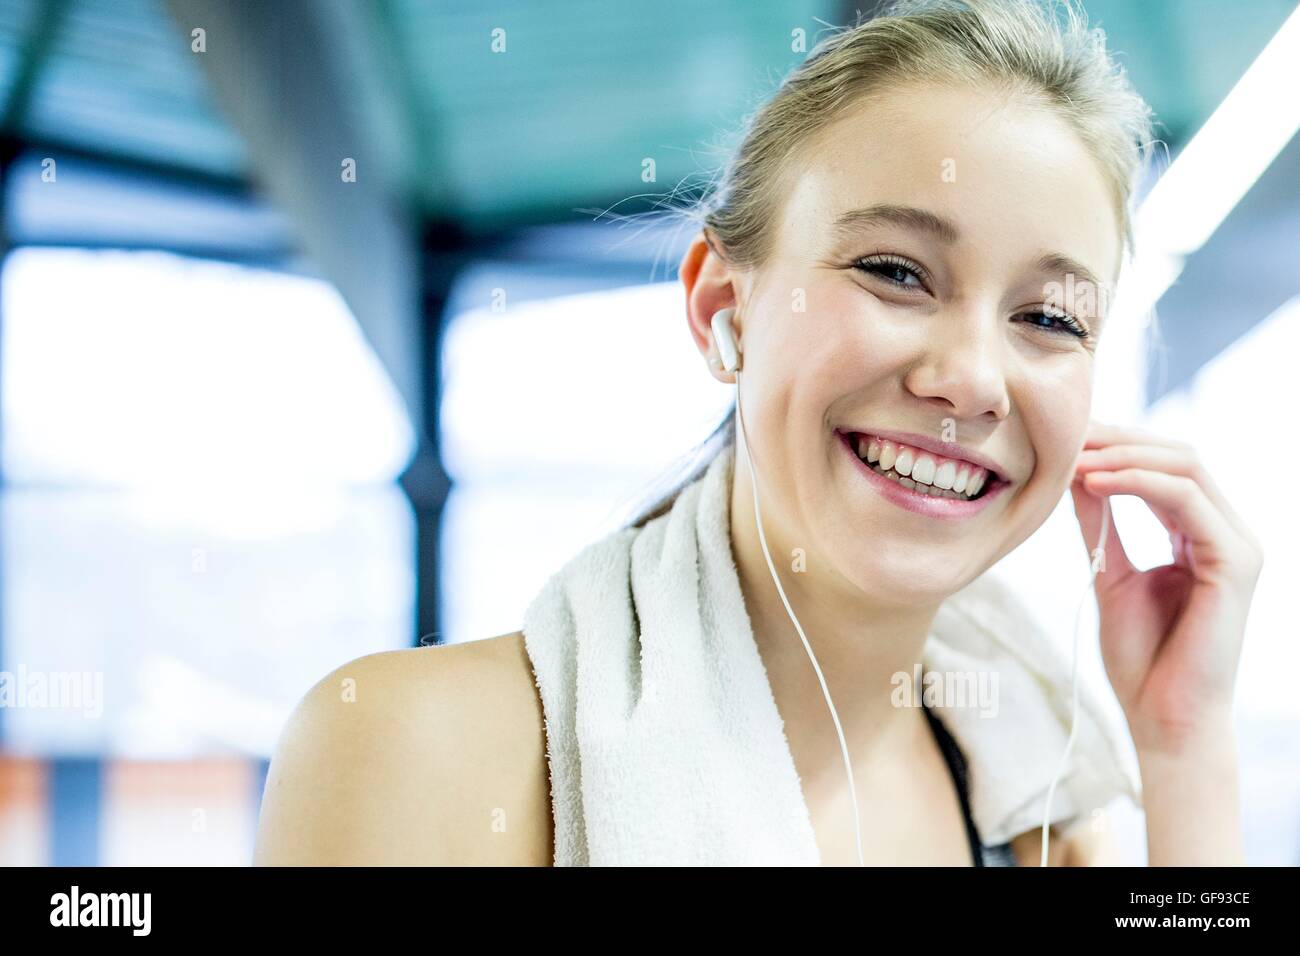 PROPERTY RELEASED. MODEL RELEASED. Young woman wearing arm band adjusting headphones in gym, portrait. Stock Photo